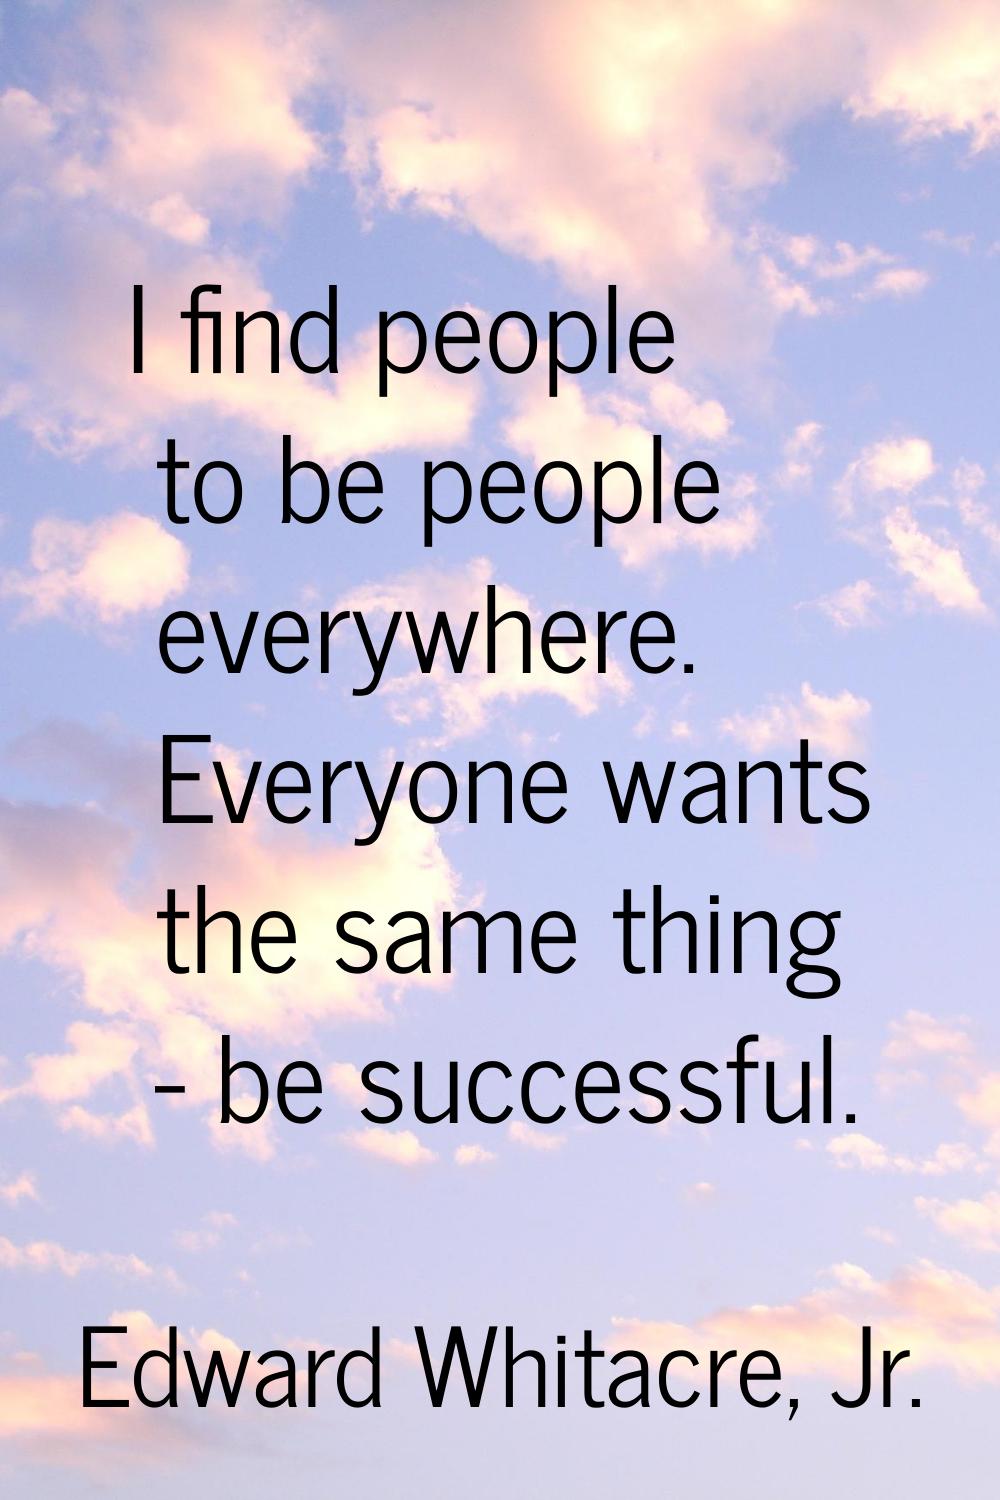 I find people to be people everywhere. Everyone wants the same thing - be successful.